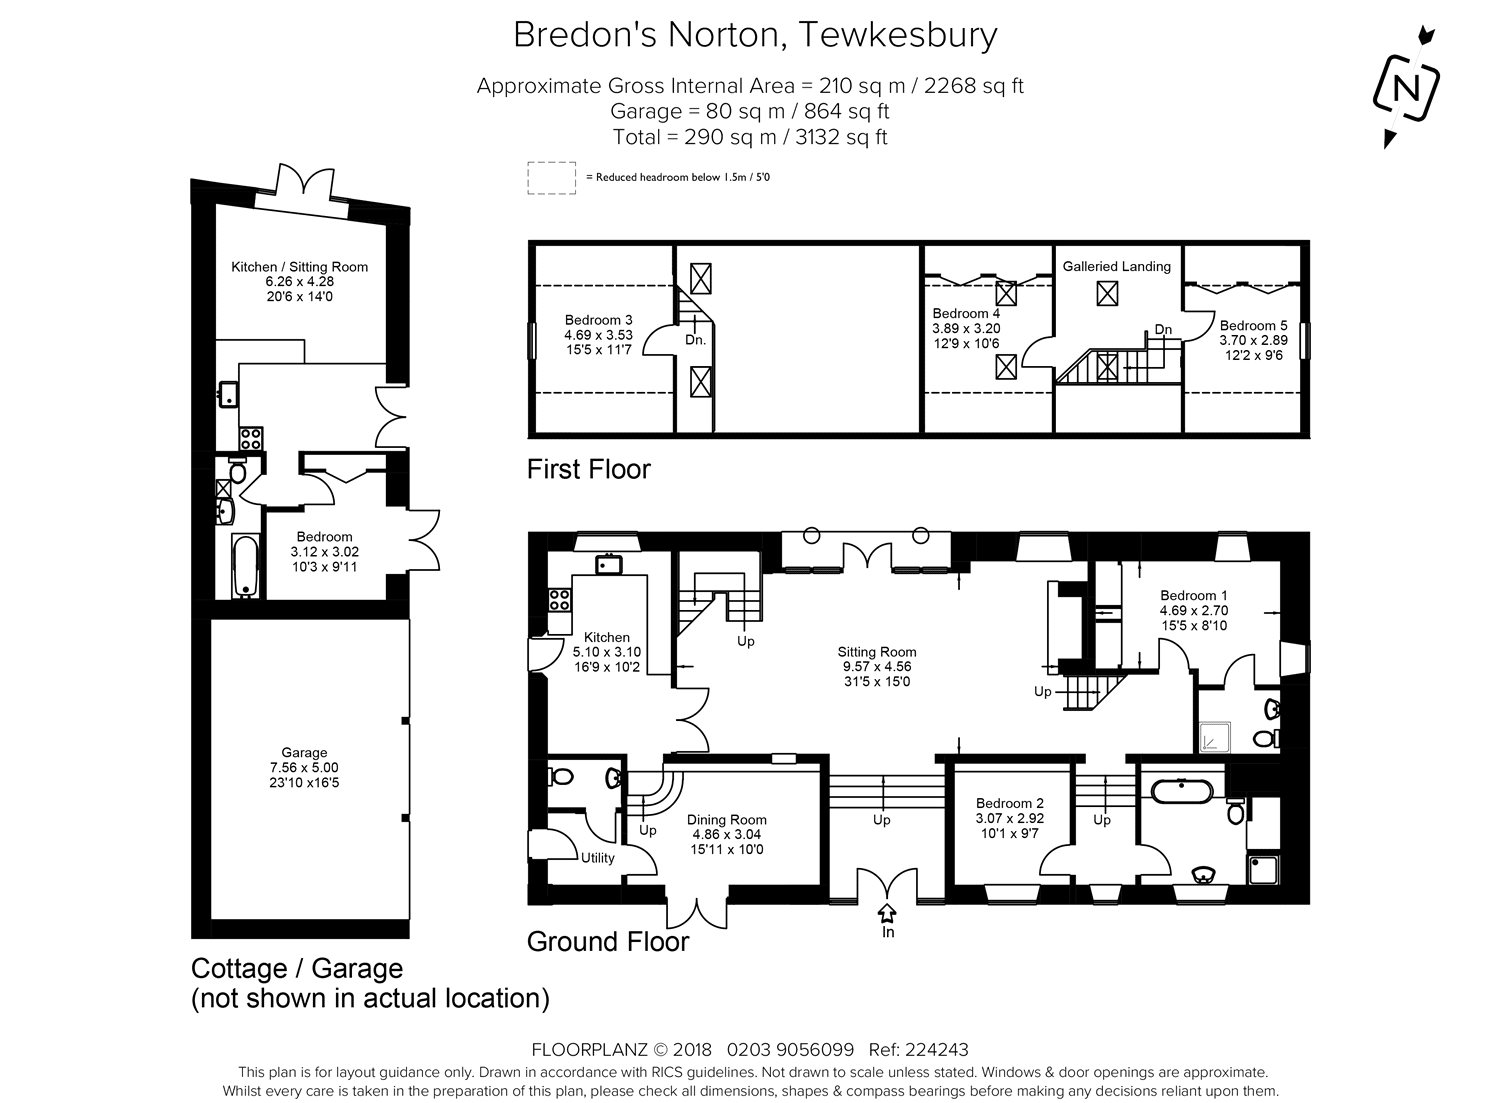 5 Bedrooms Barn conversion for sale in Bredons Norton, Tewkesbury, Worcestershire GL20